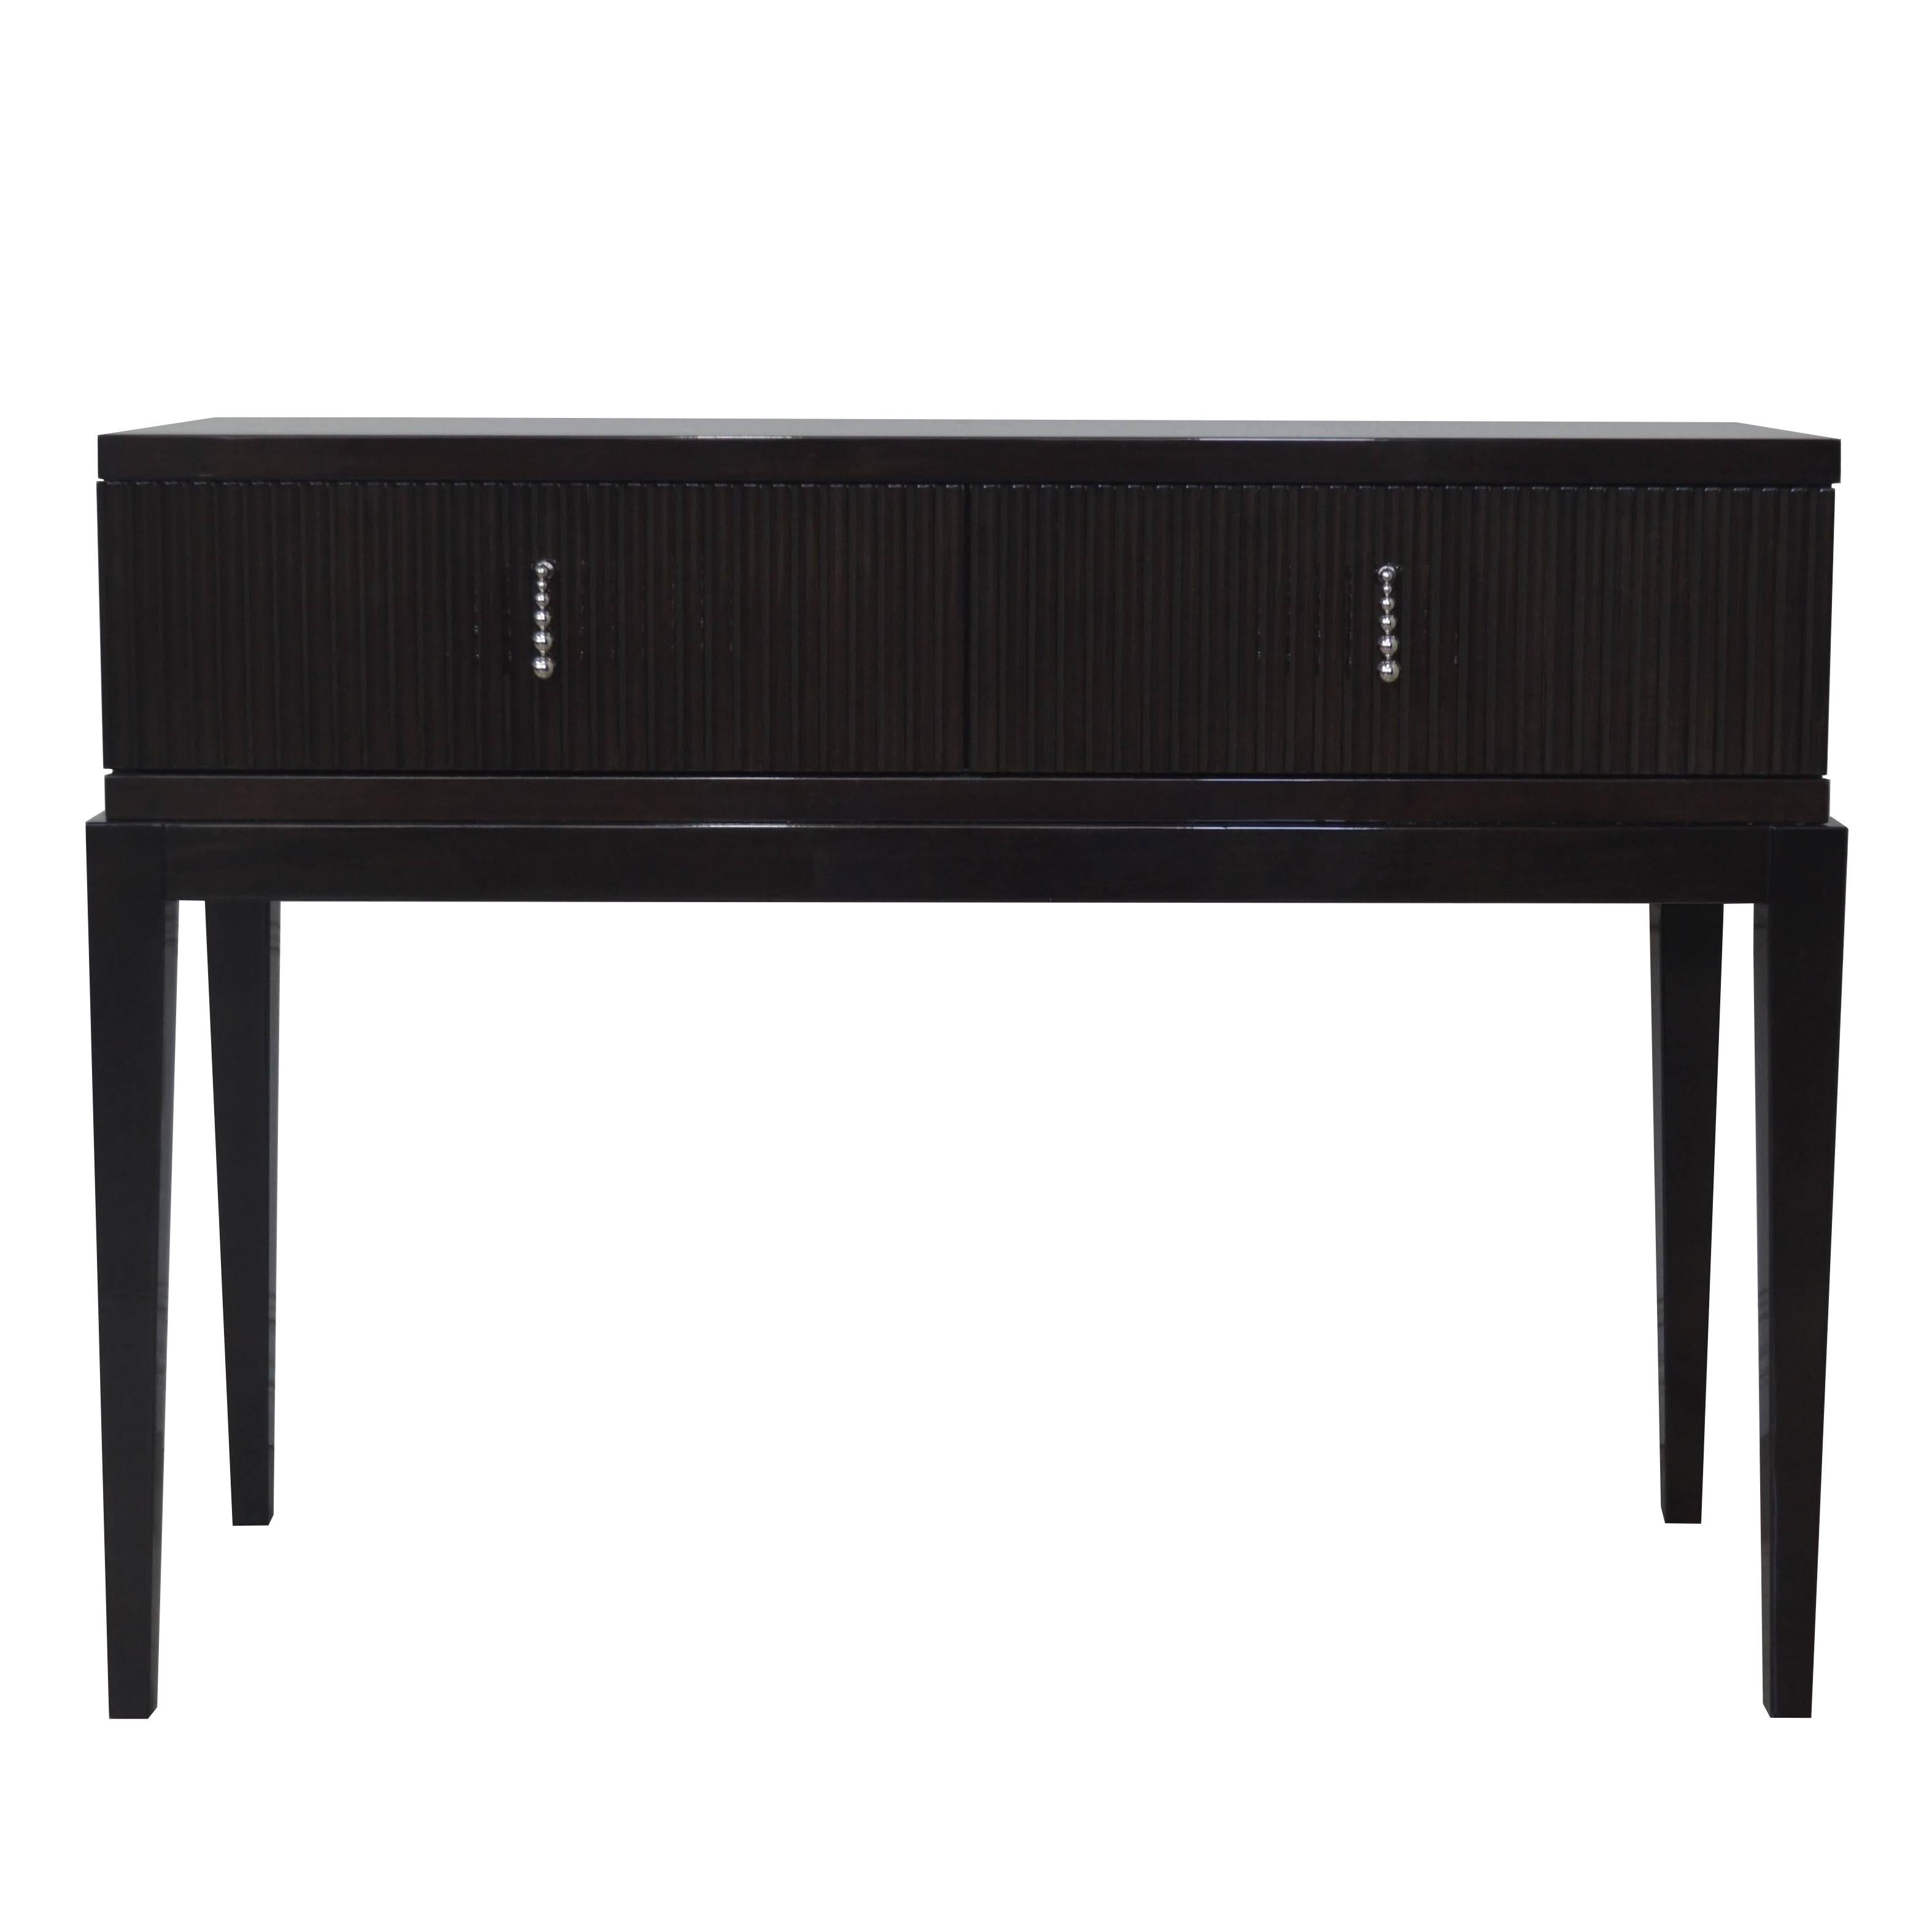 Very elegant Italian dark brown mahogany veneer console table from the style of Art Deco period supported on four legs with a high-gloss polish finish. In the style of CAVIO, with two drawers, that are upholstered inside. Its dimensions and